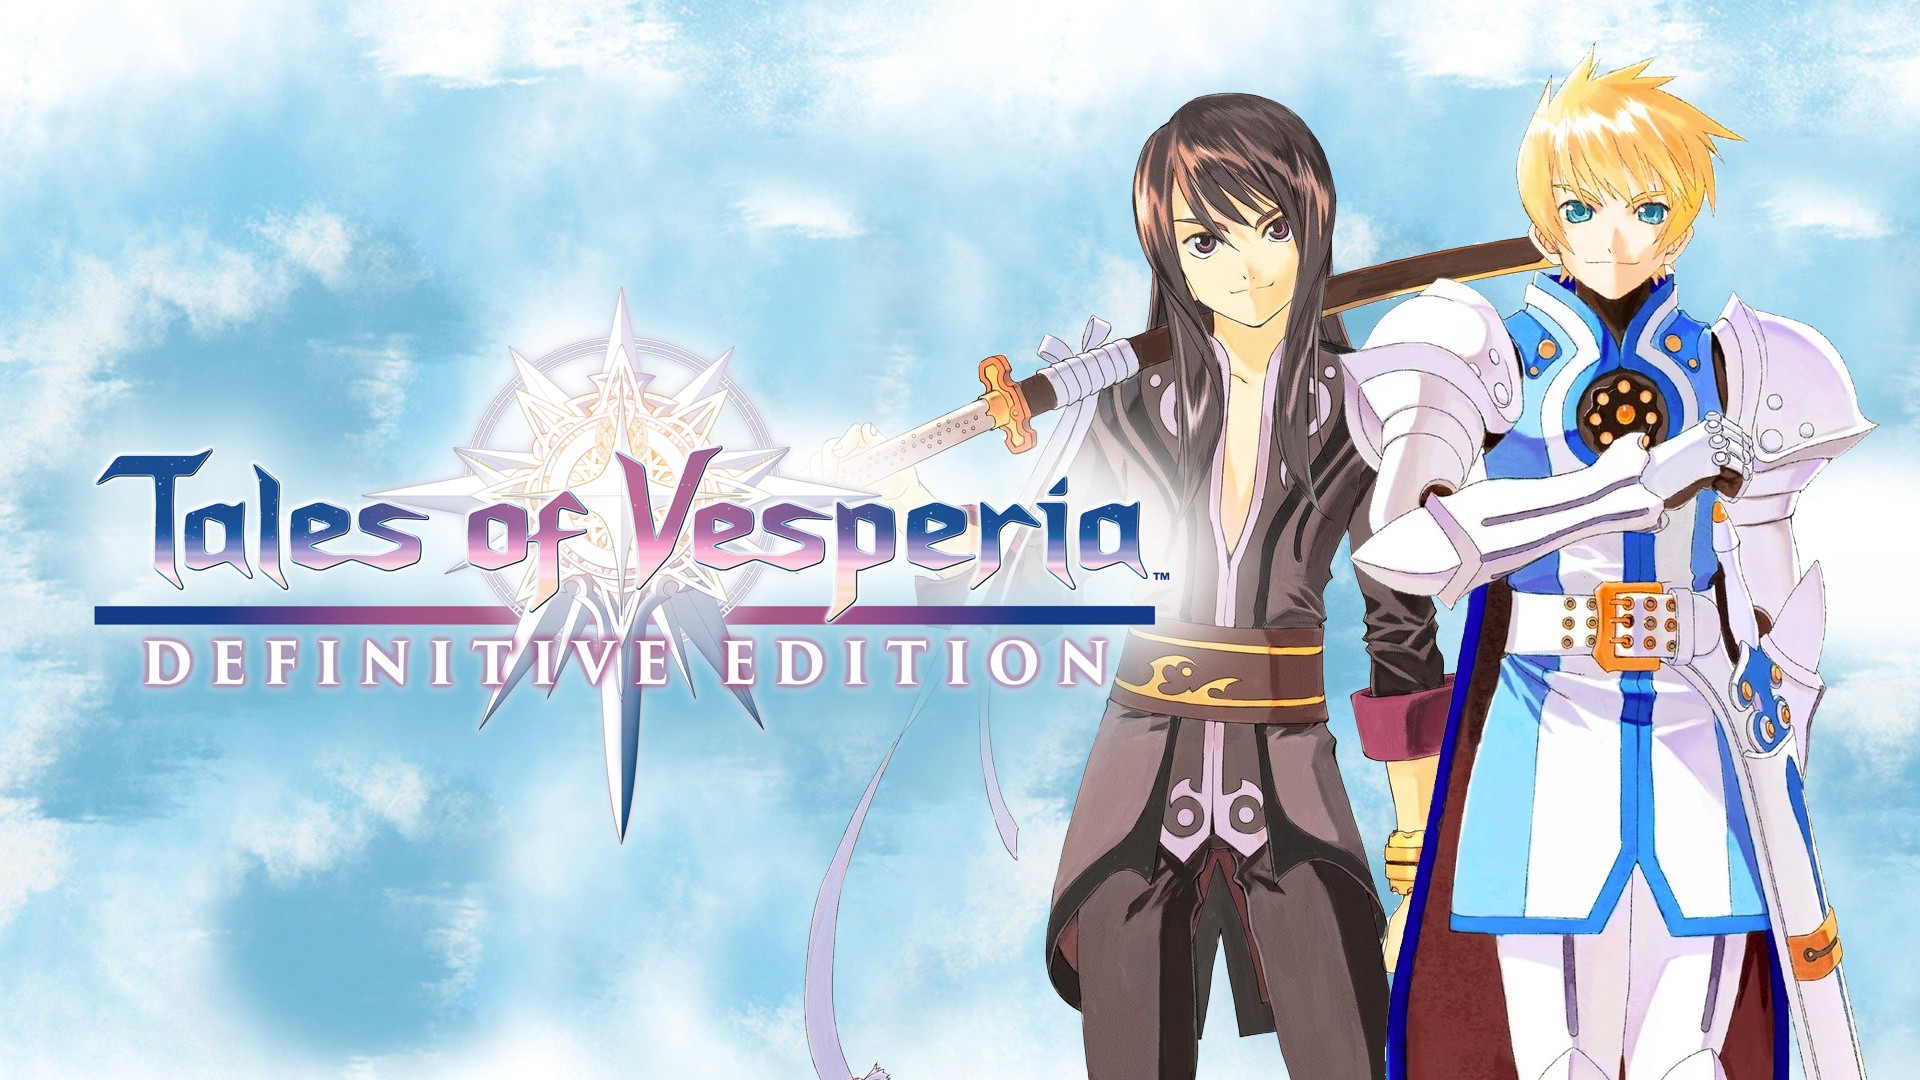 Tales of Vesperia: Definitive Edition PC Game Download For Free